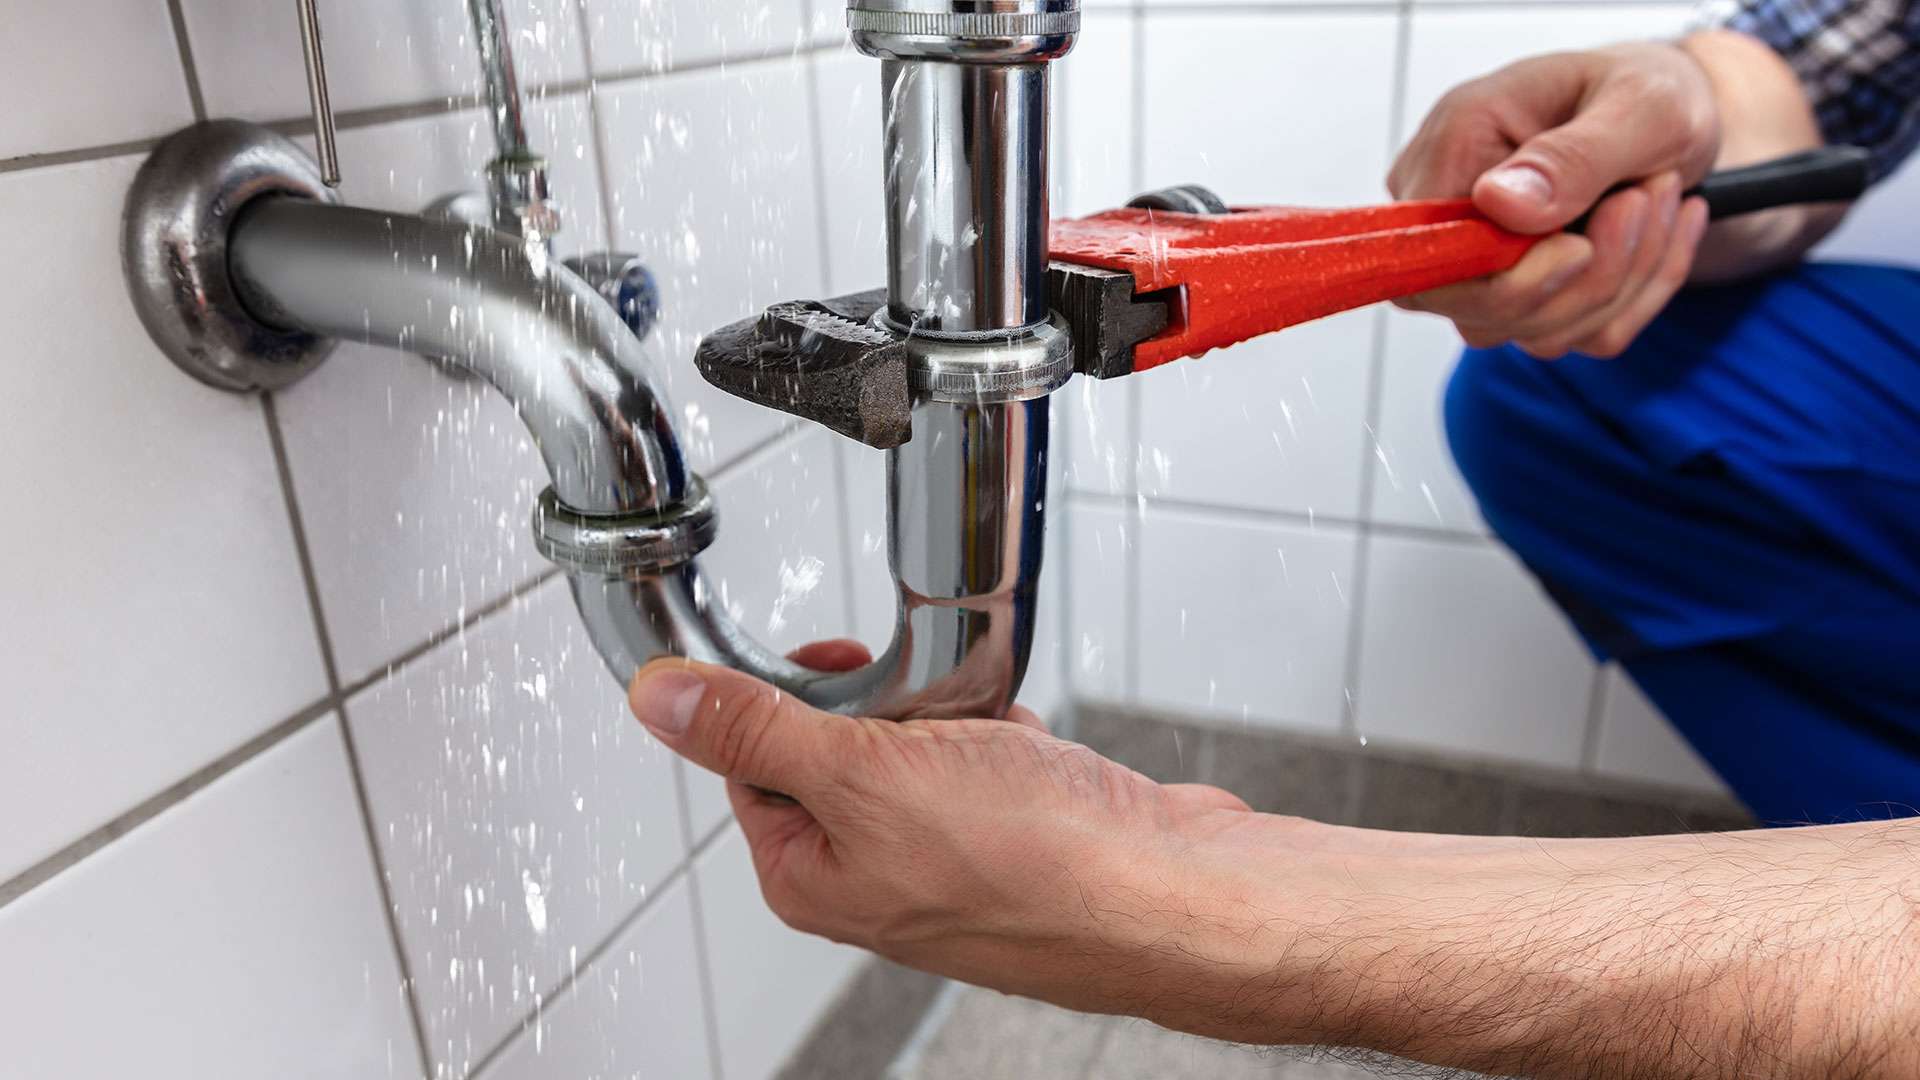 Hot Fall and Winter Plumbing Maintenance Tips for Property Managers